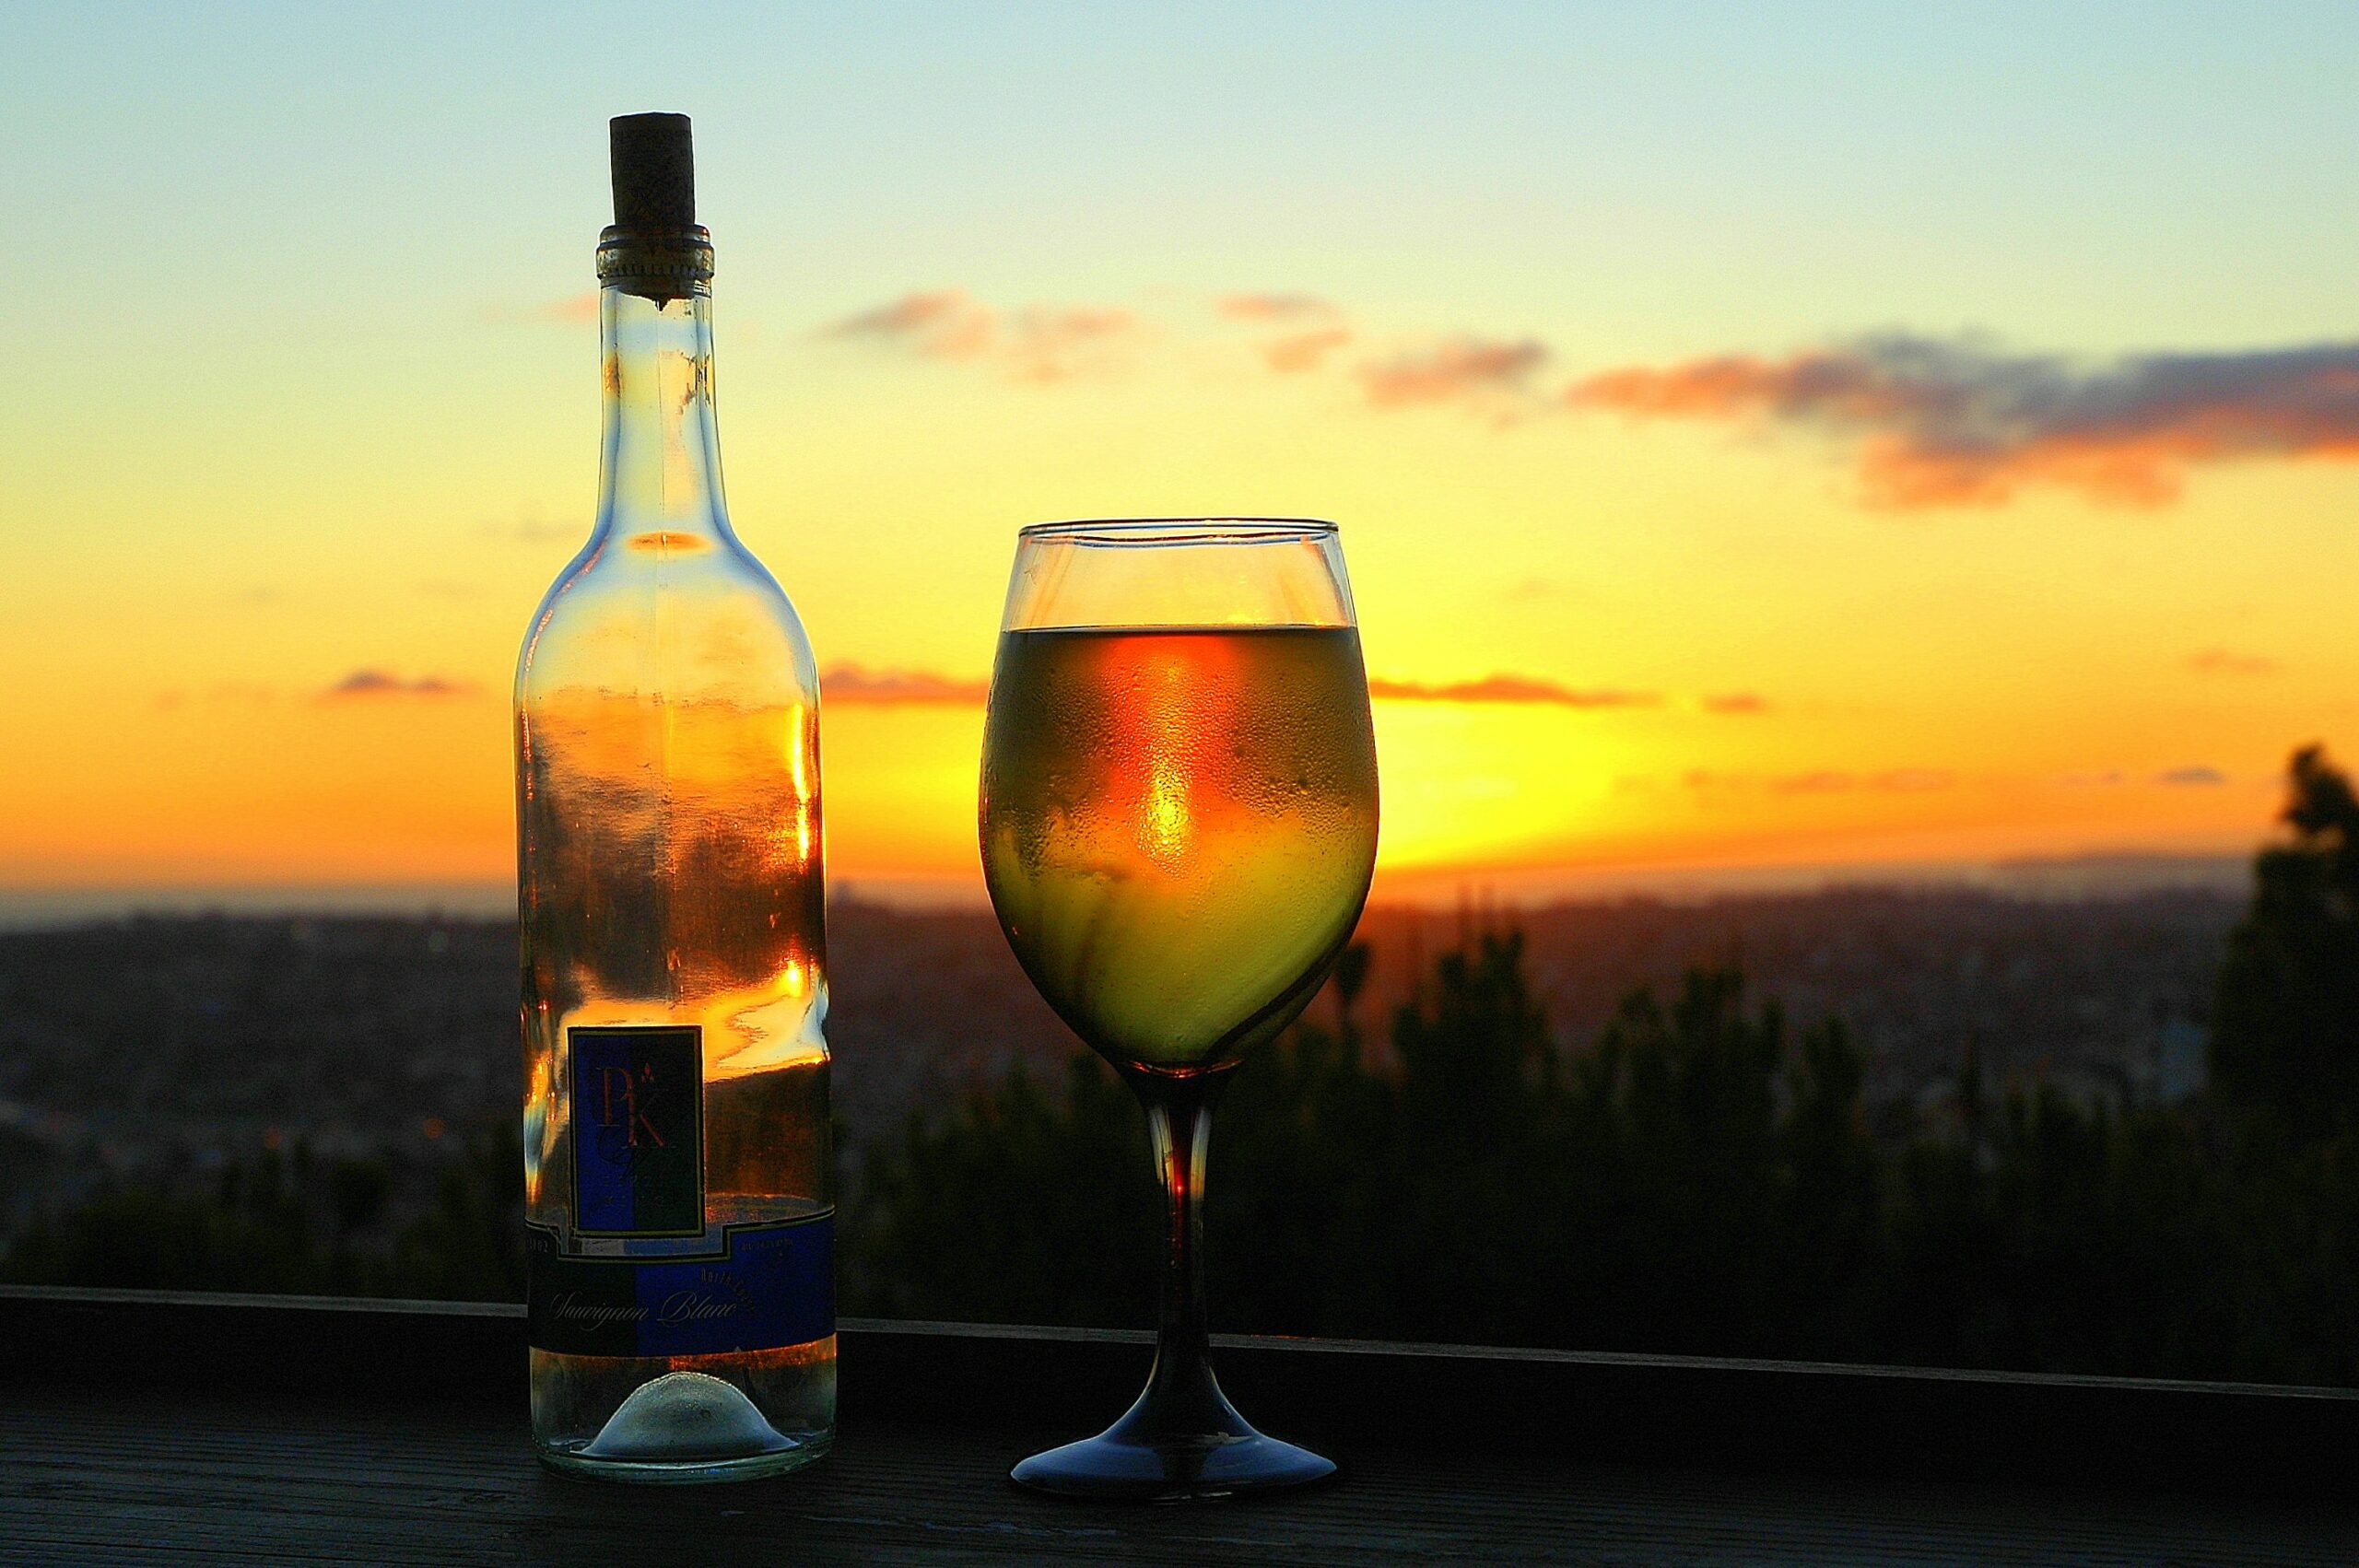 This wine and food festival is popular in San Diego during fall.
Pictured: wine during sunset in San Diego